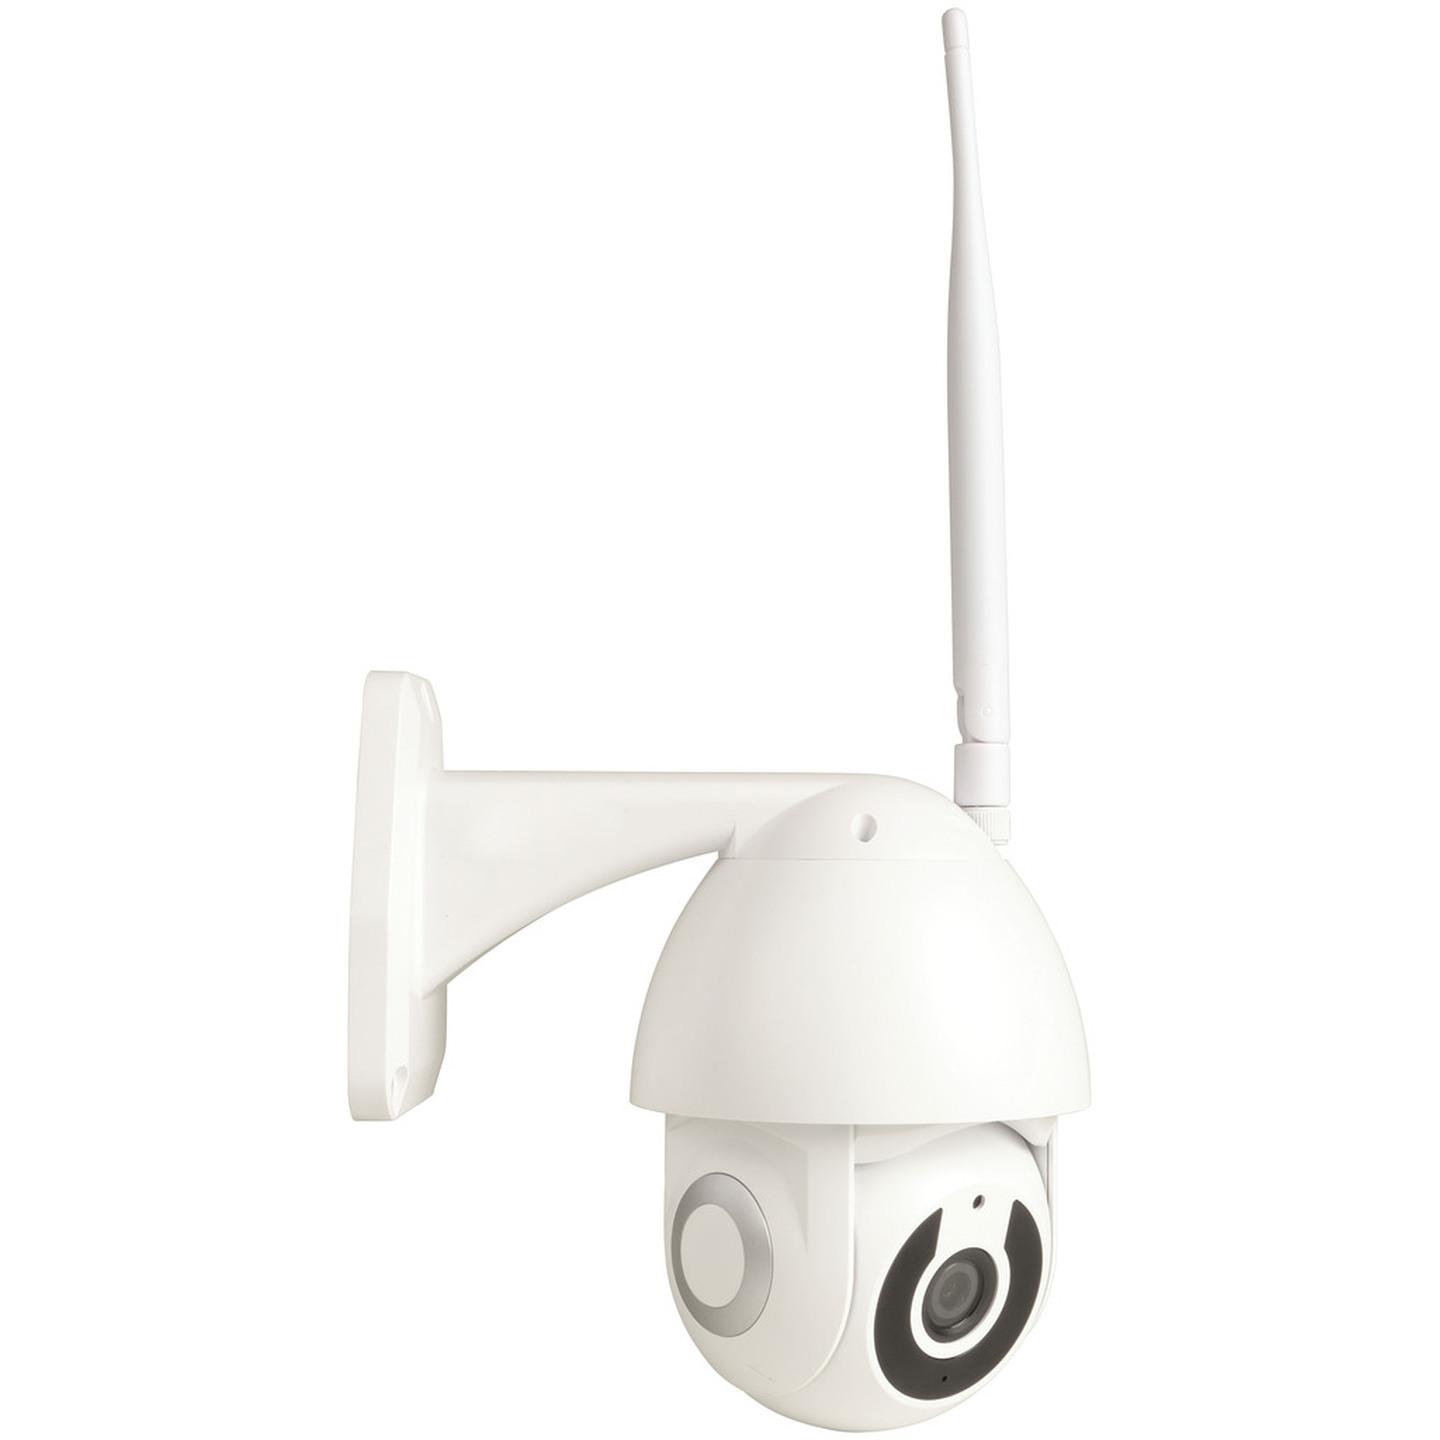 Outdoor Wireless Wi-Fi PTZ Camera with 2 Way Audio and Record